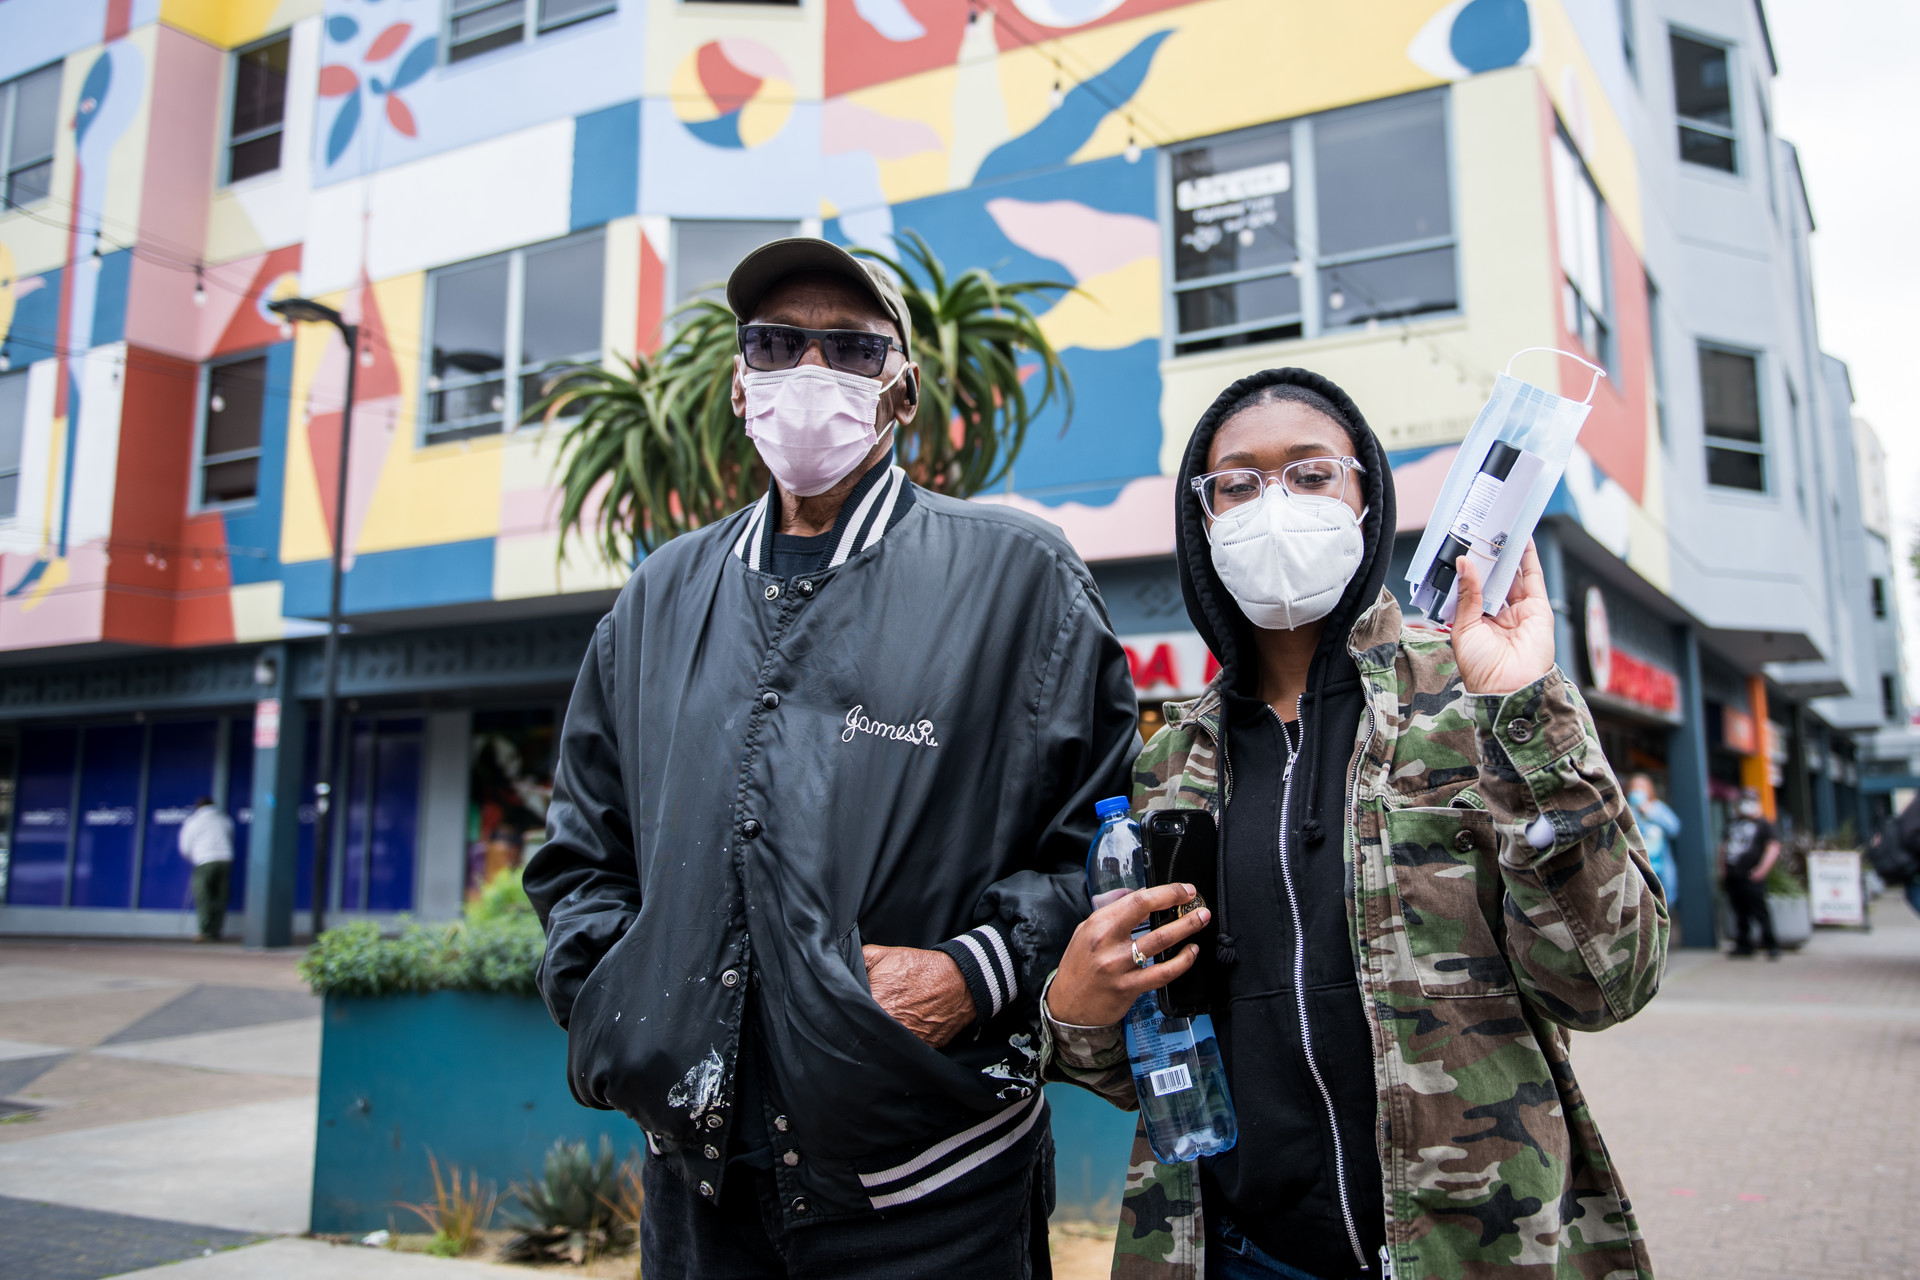 Chelsea Riley (right) and her father James Riley line up to receive free hand sanitizer and a face mask in the Fillmore on April 17, 2020.